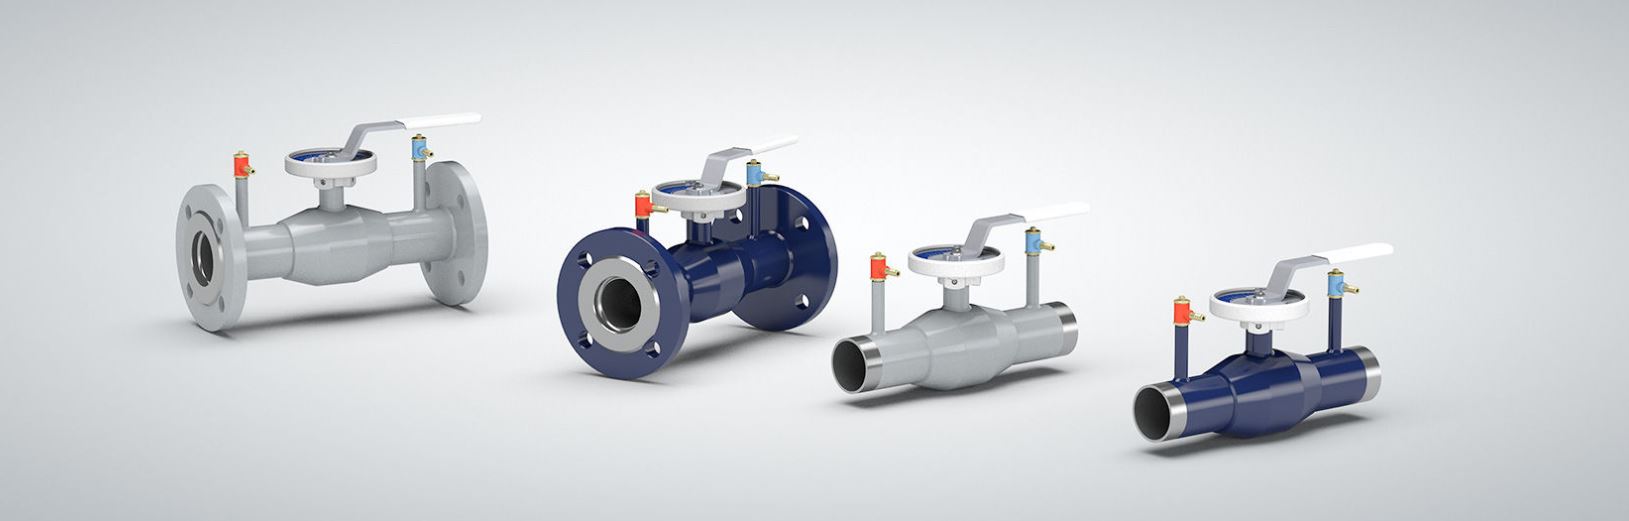 Heating and Cooling application Valve